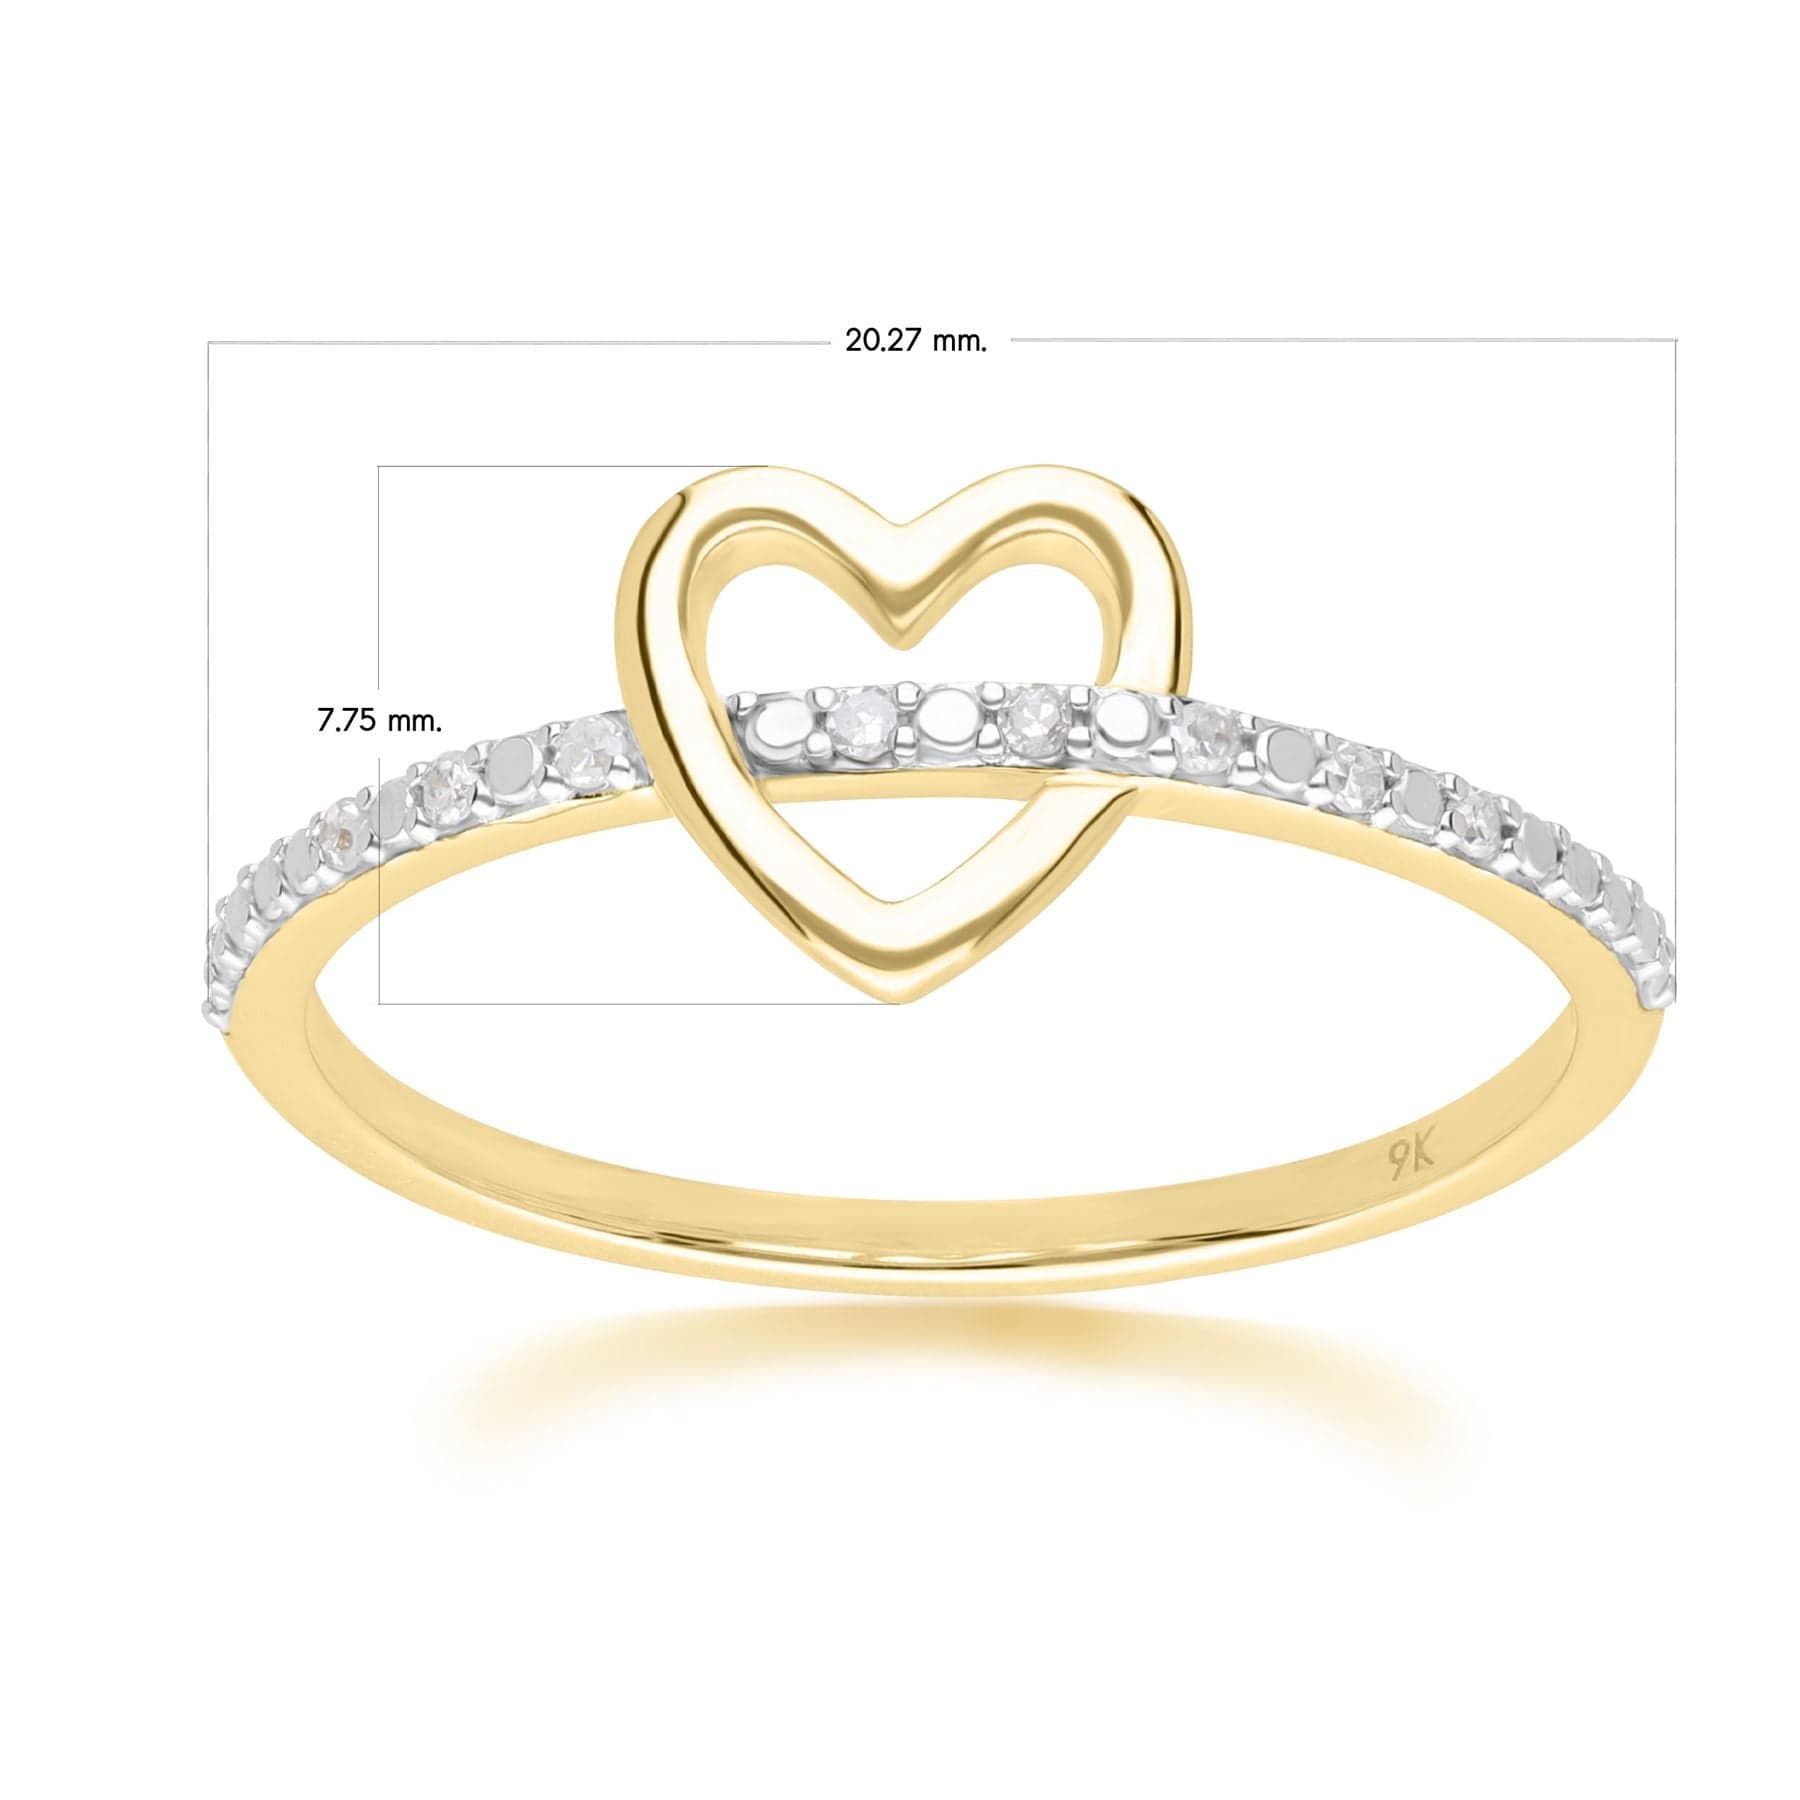 191R0935019 Love Heart Diamond Band Ring in 9ct Yellow Gold Dimensions